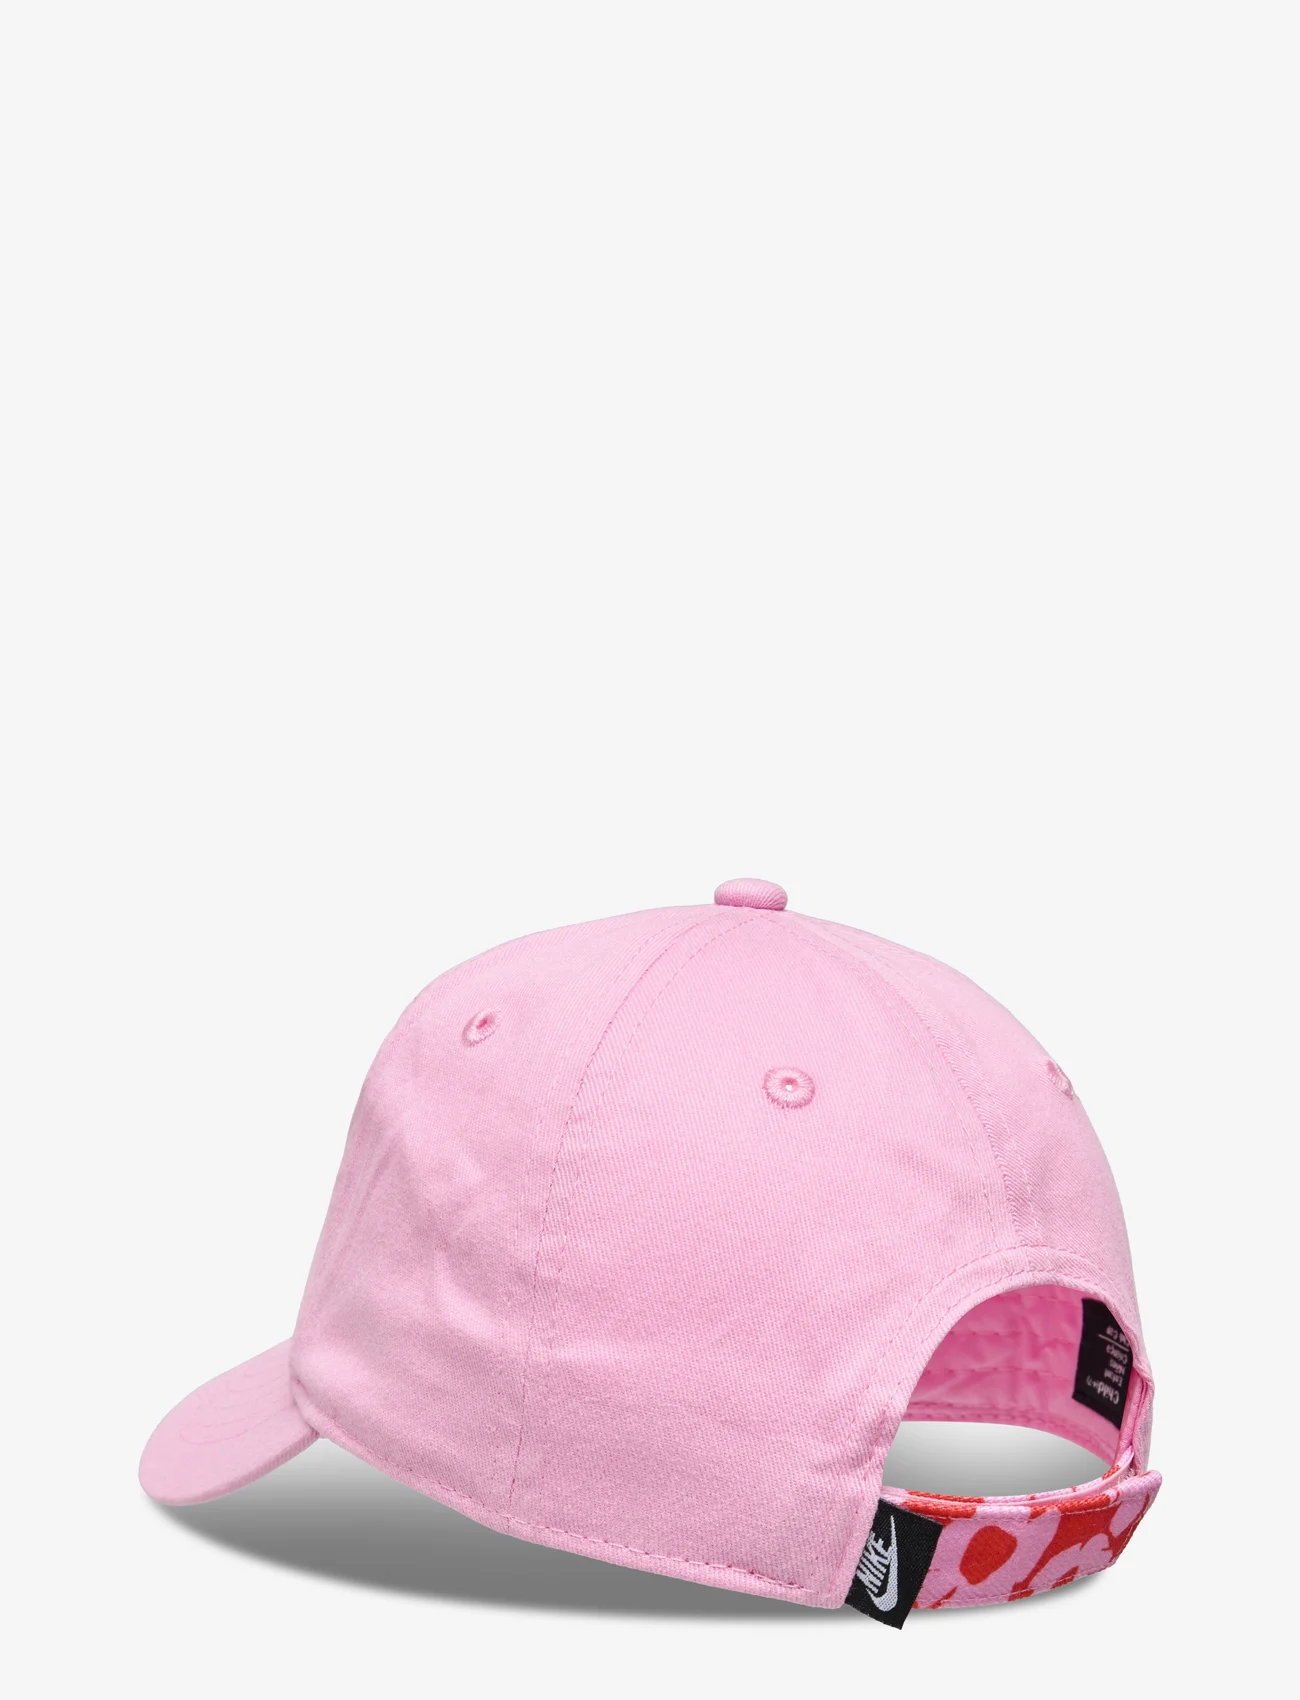 Nike - NAG YOUR MOVE CLUB CAP / NAG YOUR MOVE CLUB CAP - sommarfynd - pink rise - 1